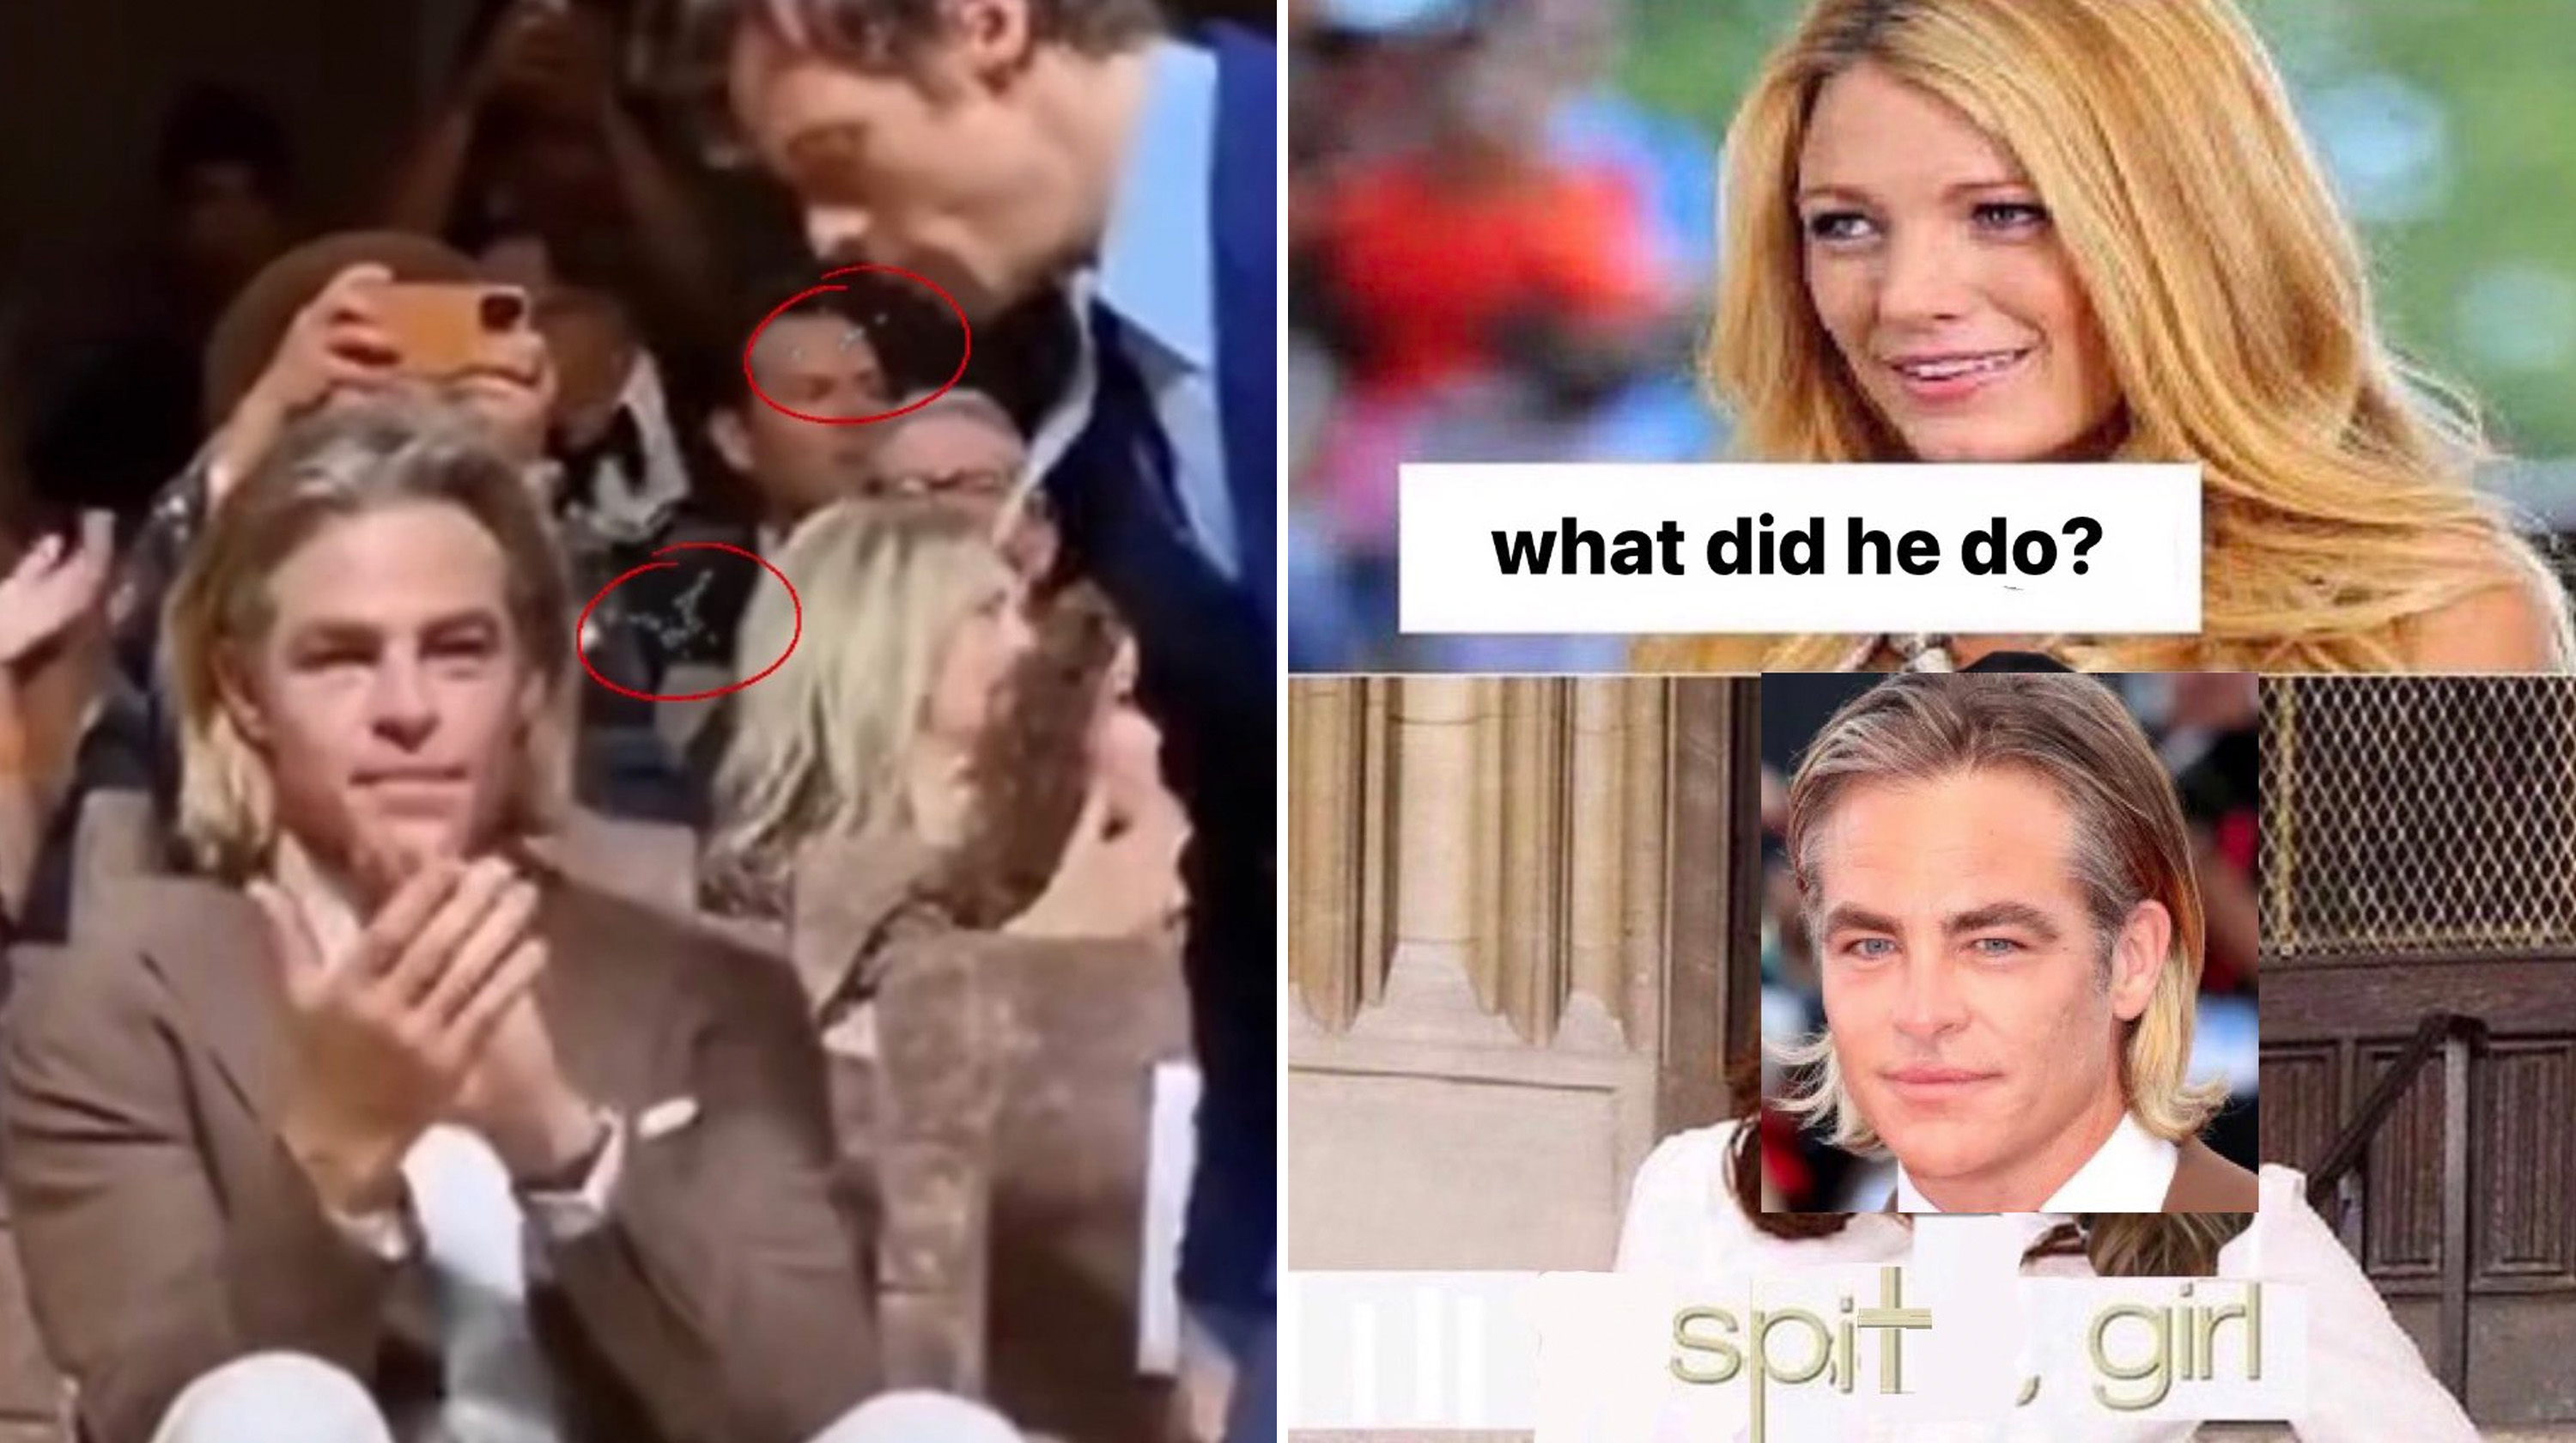 Chris Spine sitting and Harry Styles spitting beside him; Chris and Olivia meme